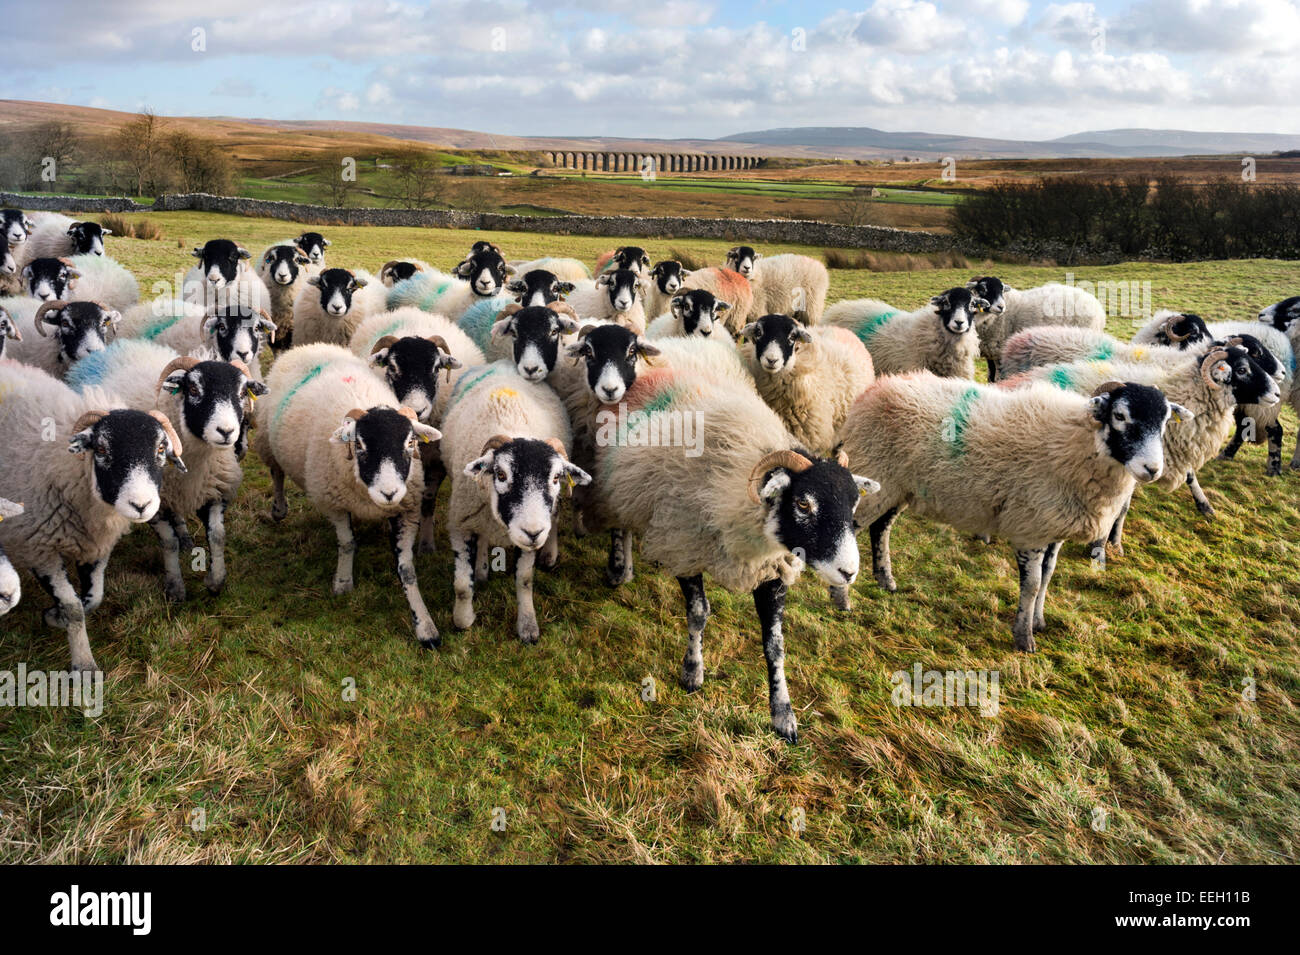 A flock of Swaledale sheep at Ribblehead, Yorkshire Dales, UK, with the famous railway viaduct in the background Stock Photo